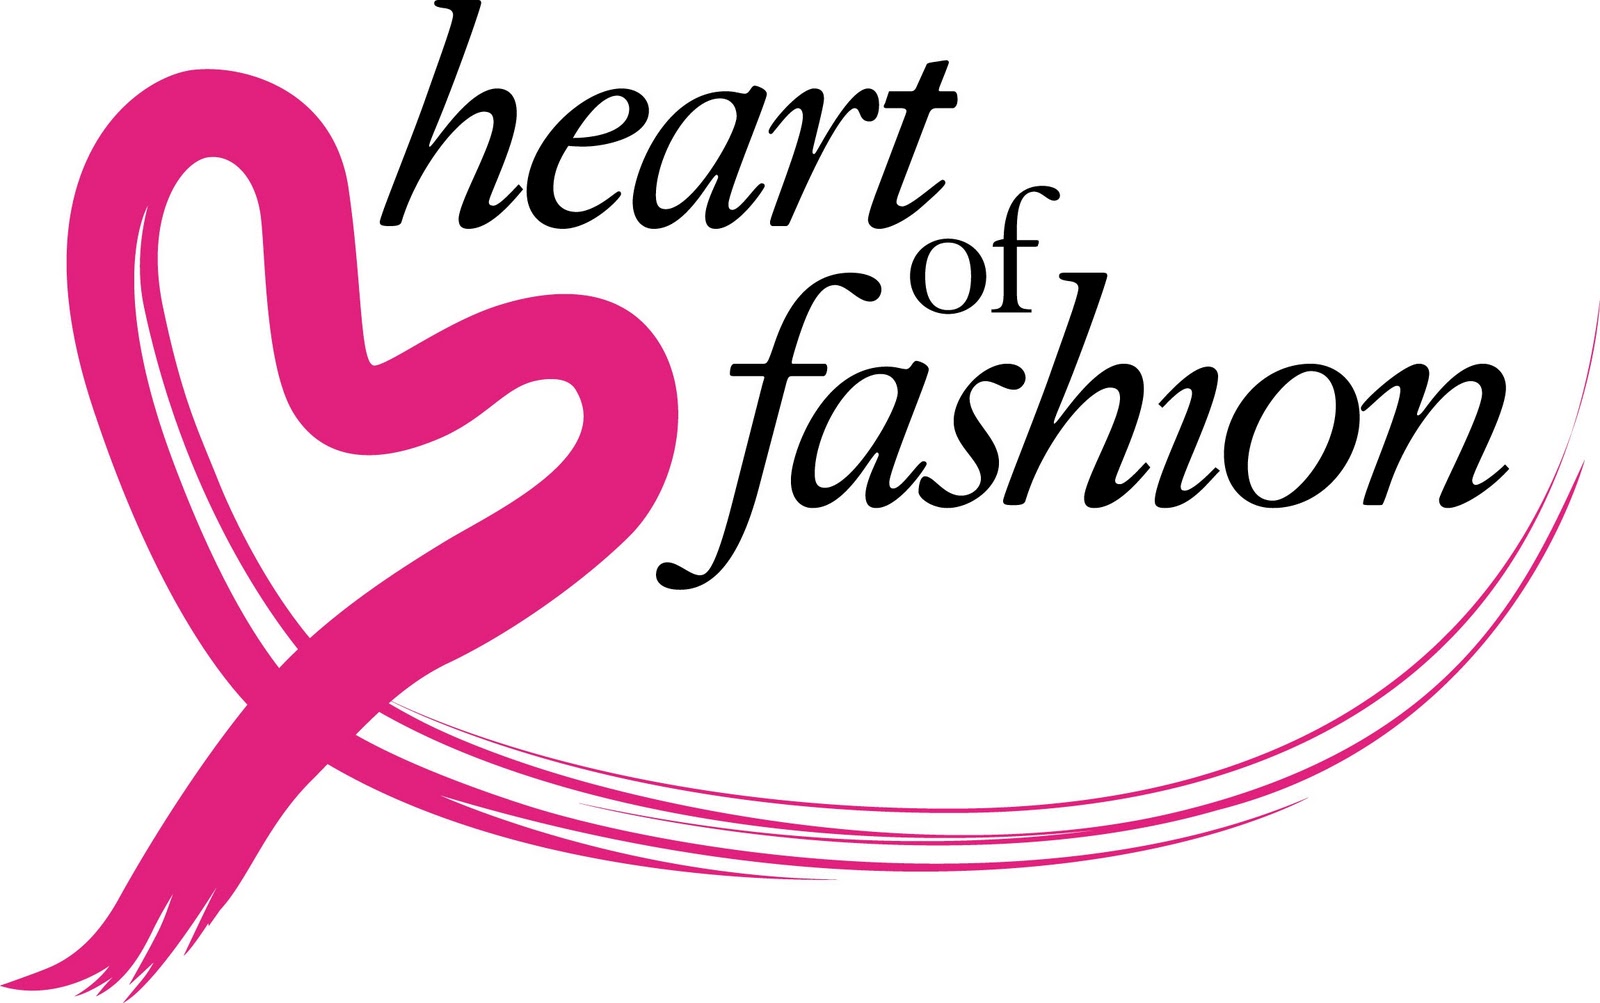 Clothing Brands With Heart Logos Best Design Idea